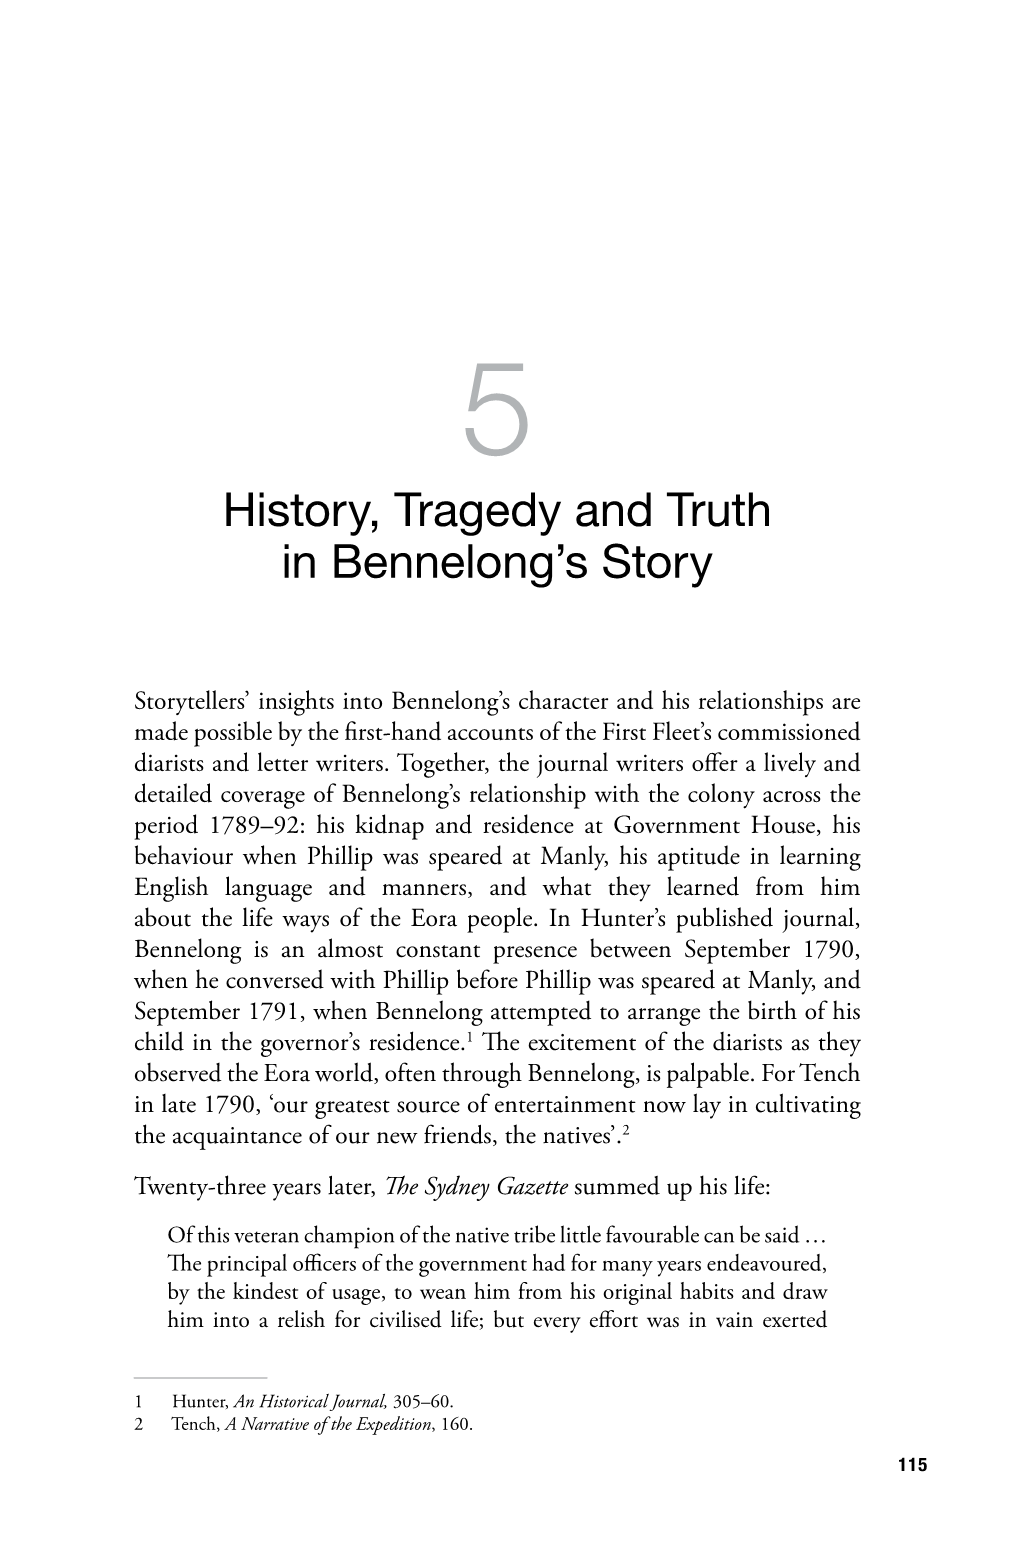 5. History, Tragedy and Truth in Bennelong's Story